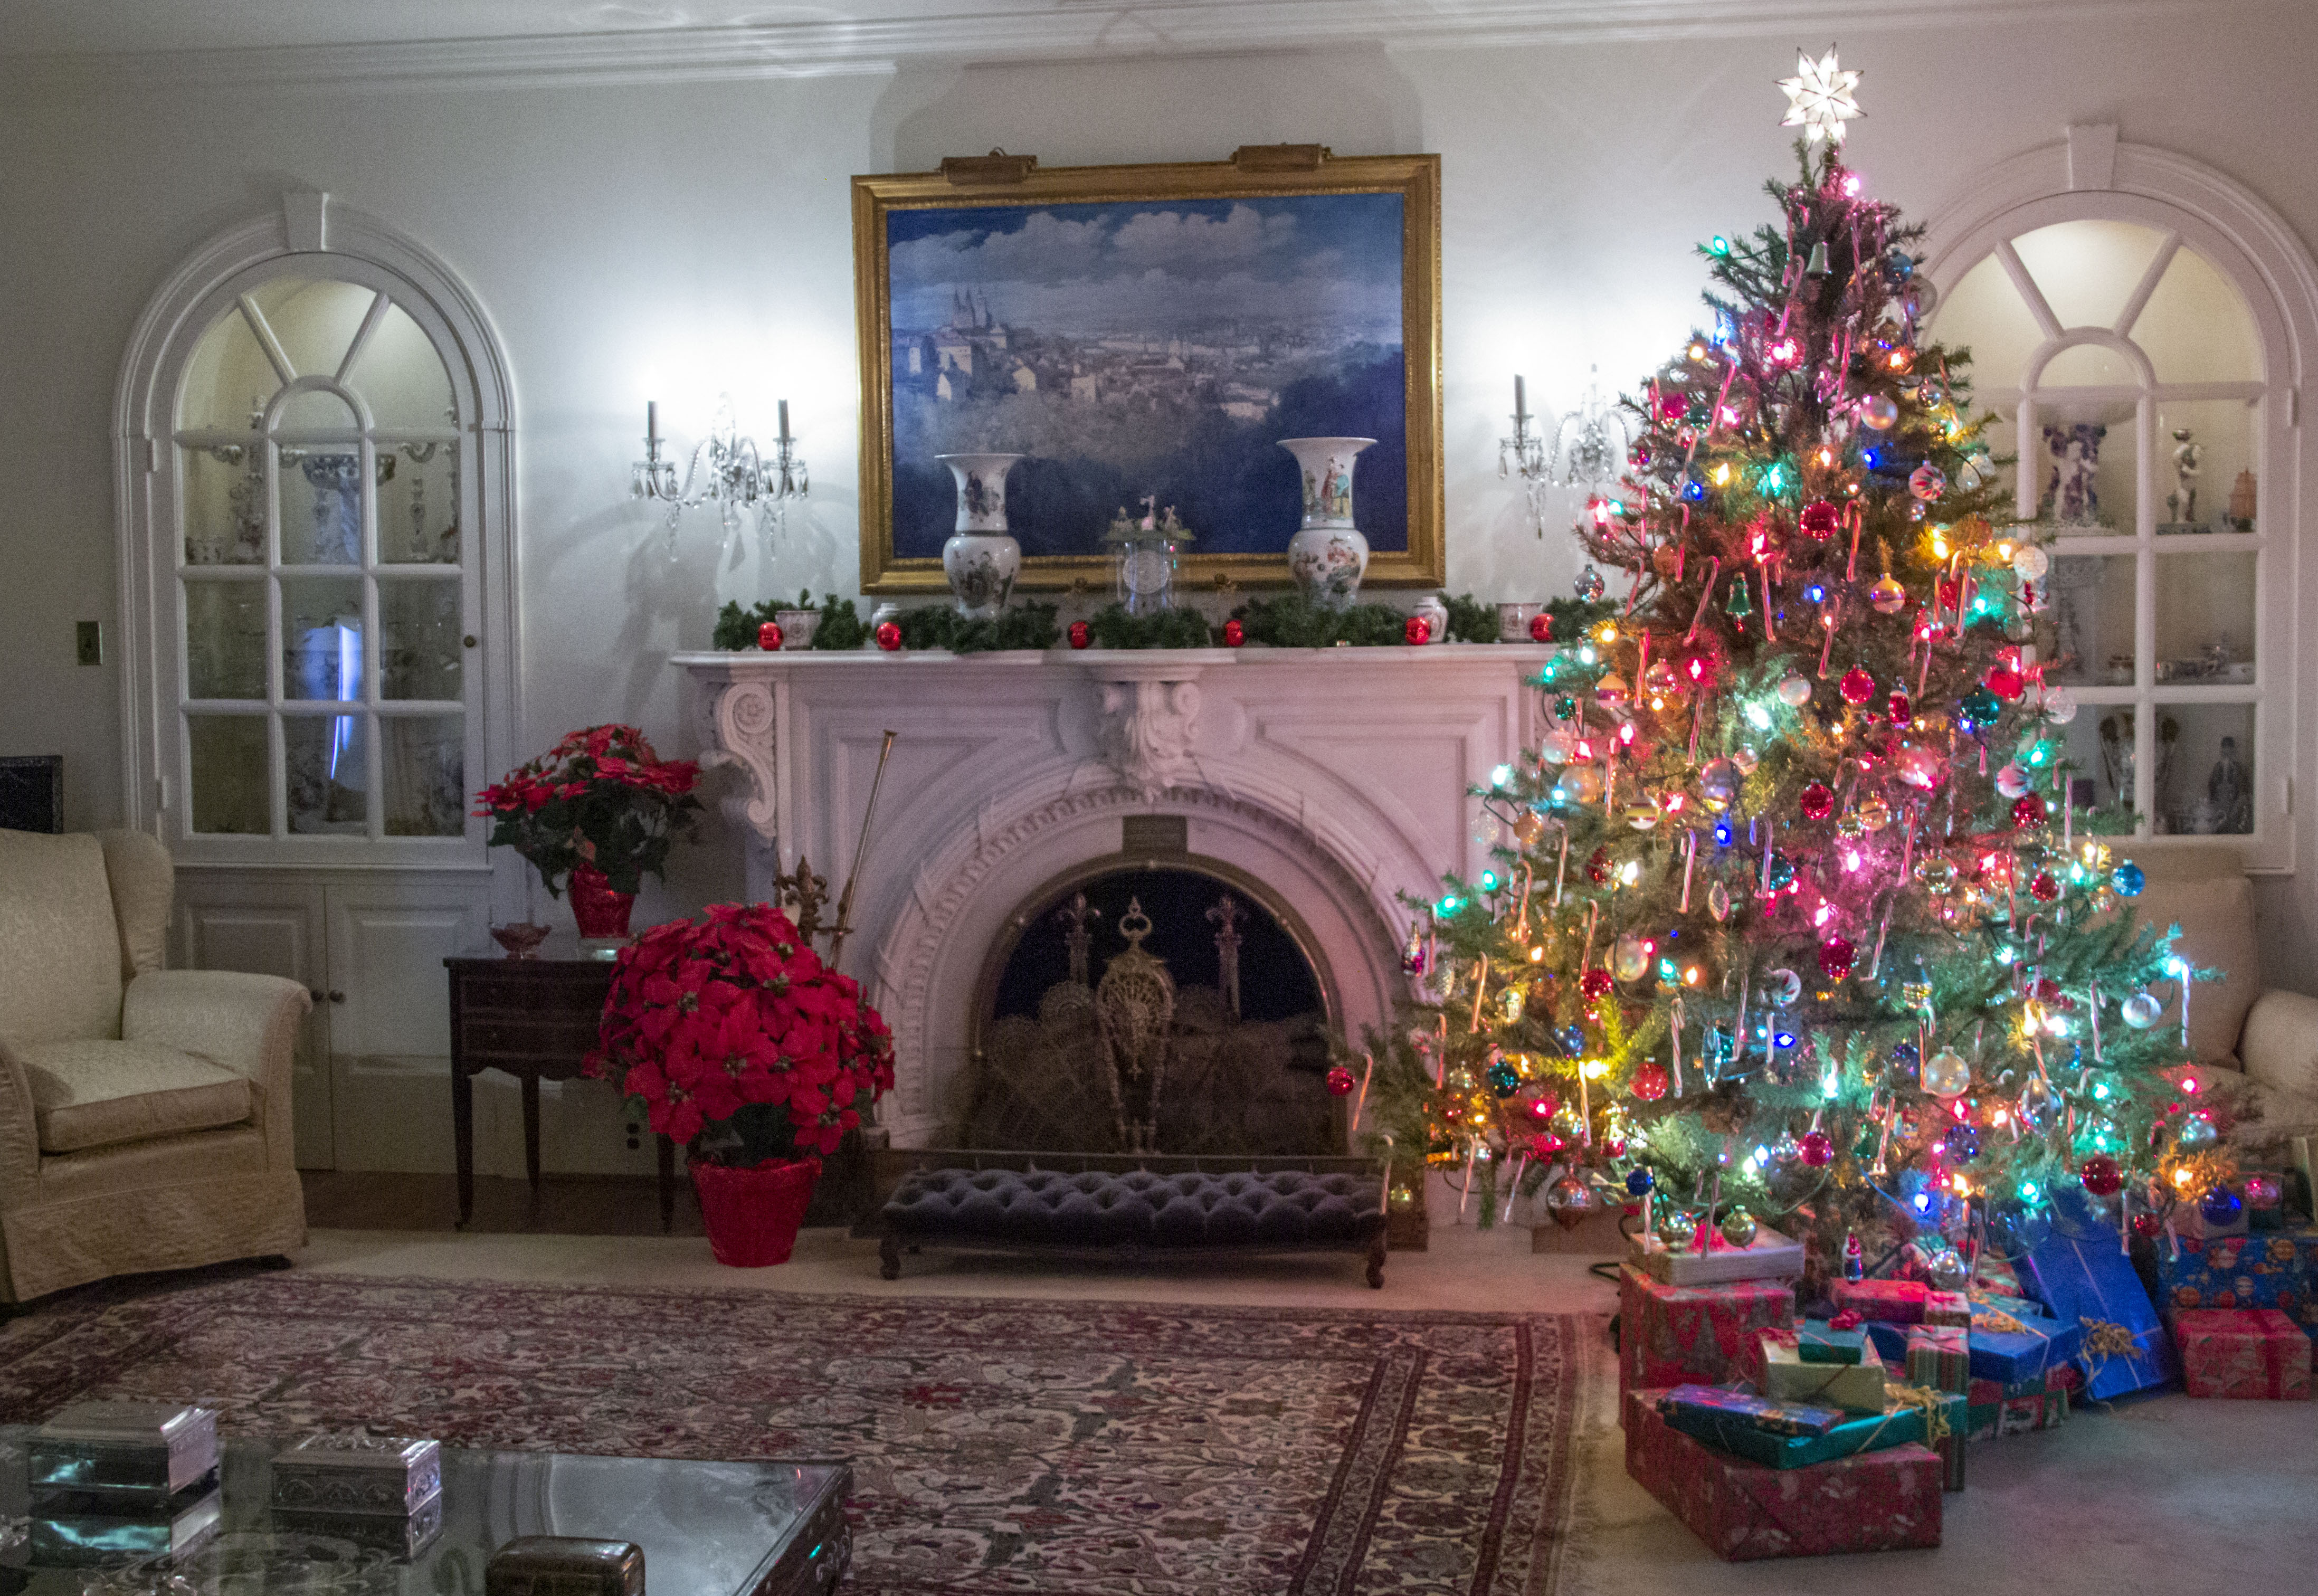 A decorated room for Christmas. There is a colorful lit tree with wrapped presents on the right. There is a fireplace and mantle with a painting in the middle. There is a tan armchair and a red poinsettia on the right.